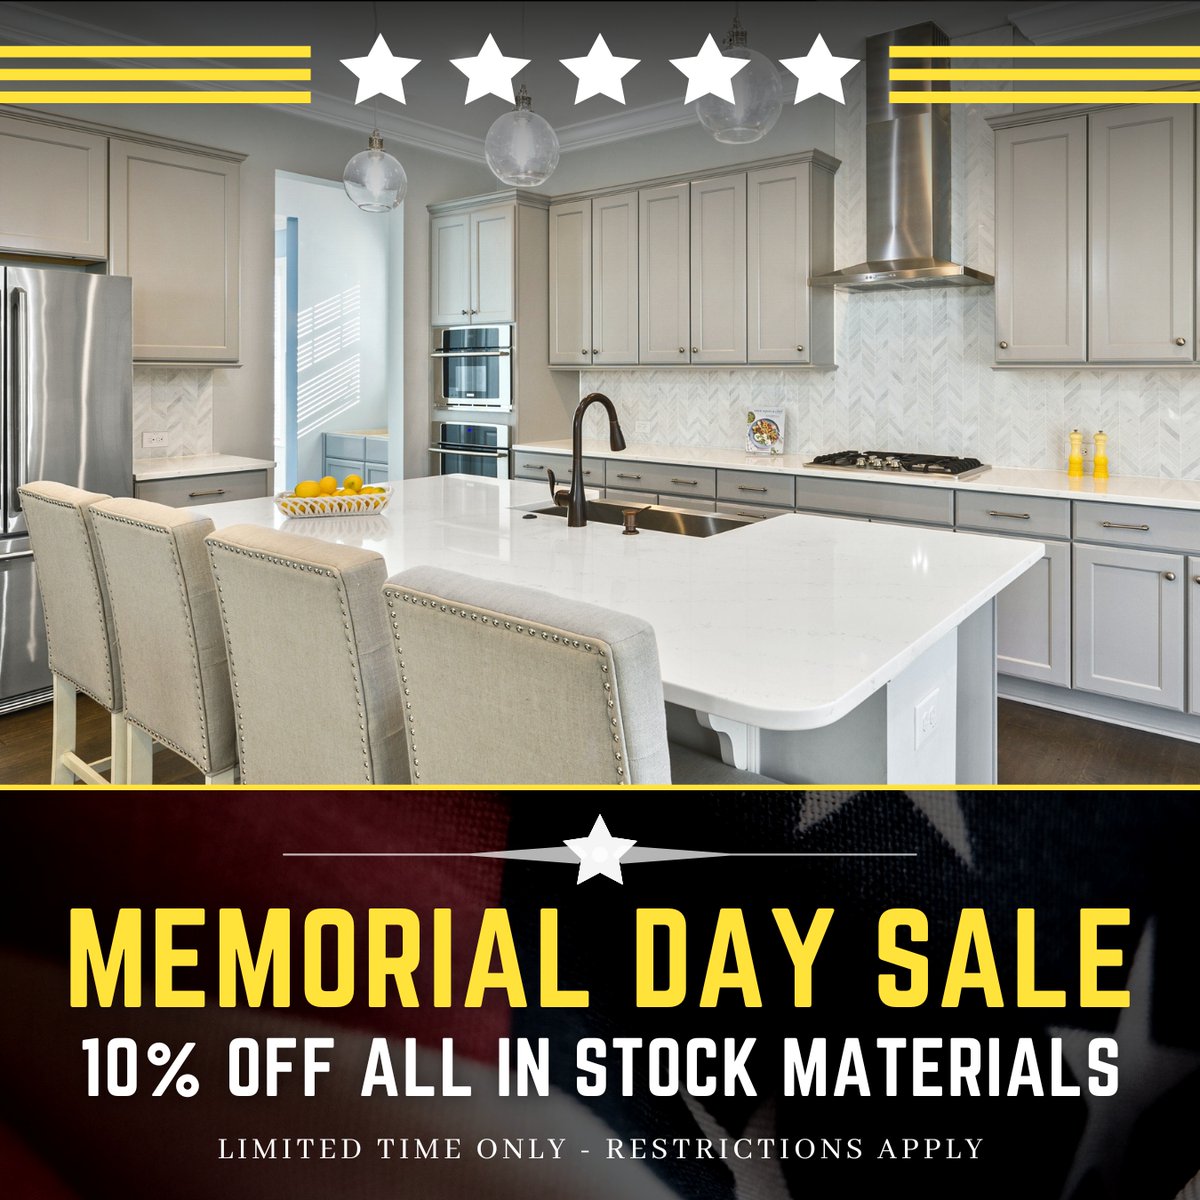 Take 10% OFF All In Stock Stones! Contact Us To Learn More!

#countertops #granitecountertops #granitefabrication #quartzitecountertops #marblecountertops #quartzcountertops #quartzite #granite #kitchencountertops #kitchenisland #kitchenrenovation #bathroomrenovation #bathroo ...